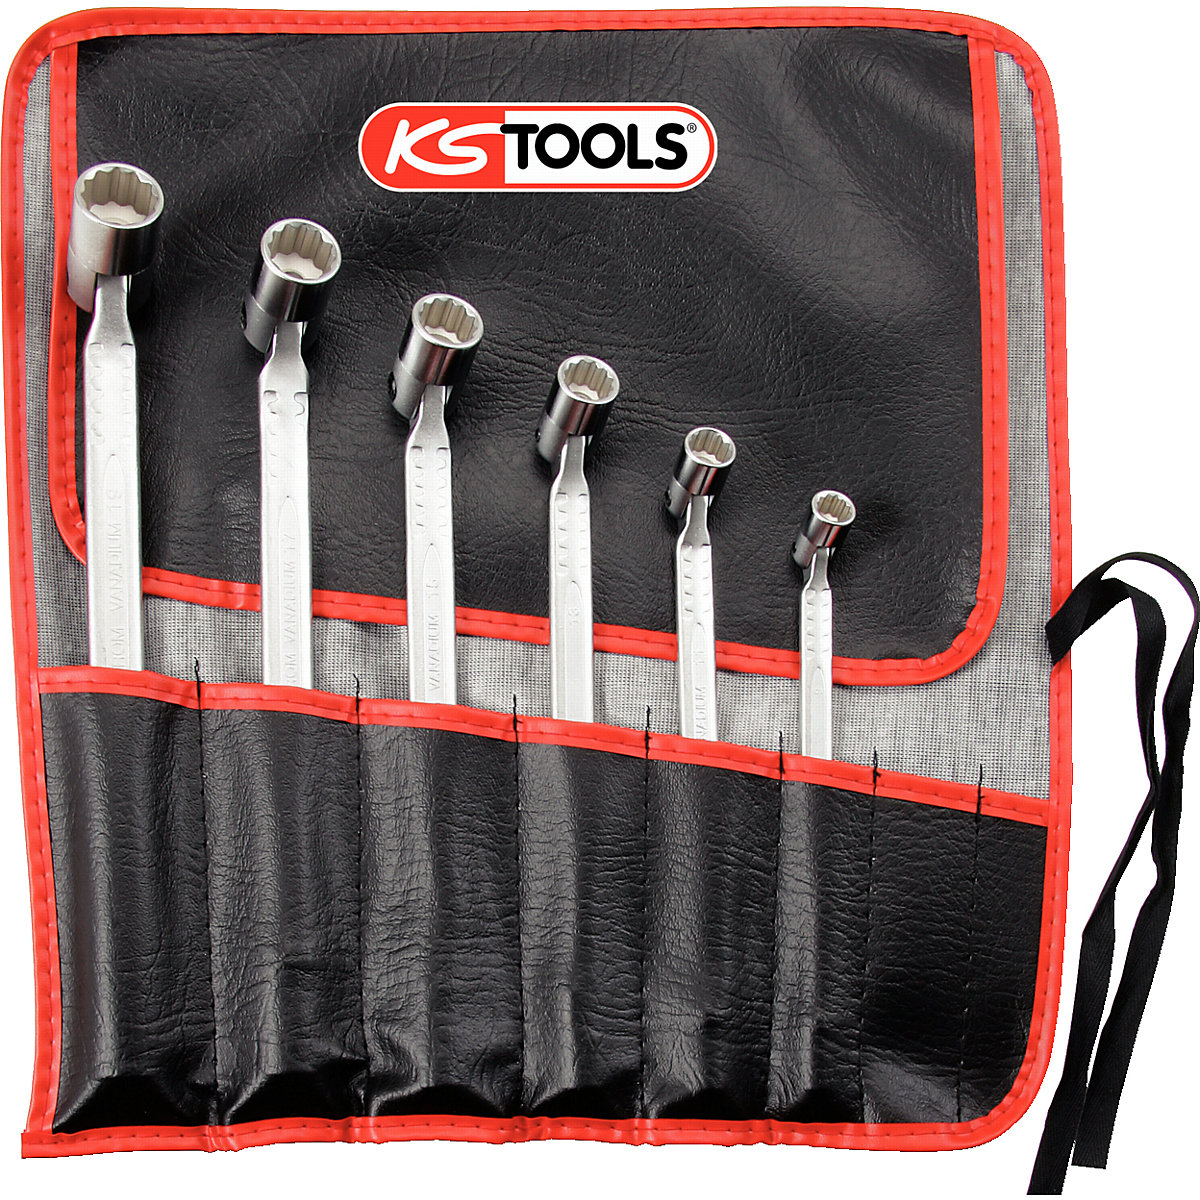 Set of double flex wrenches - KS Tools